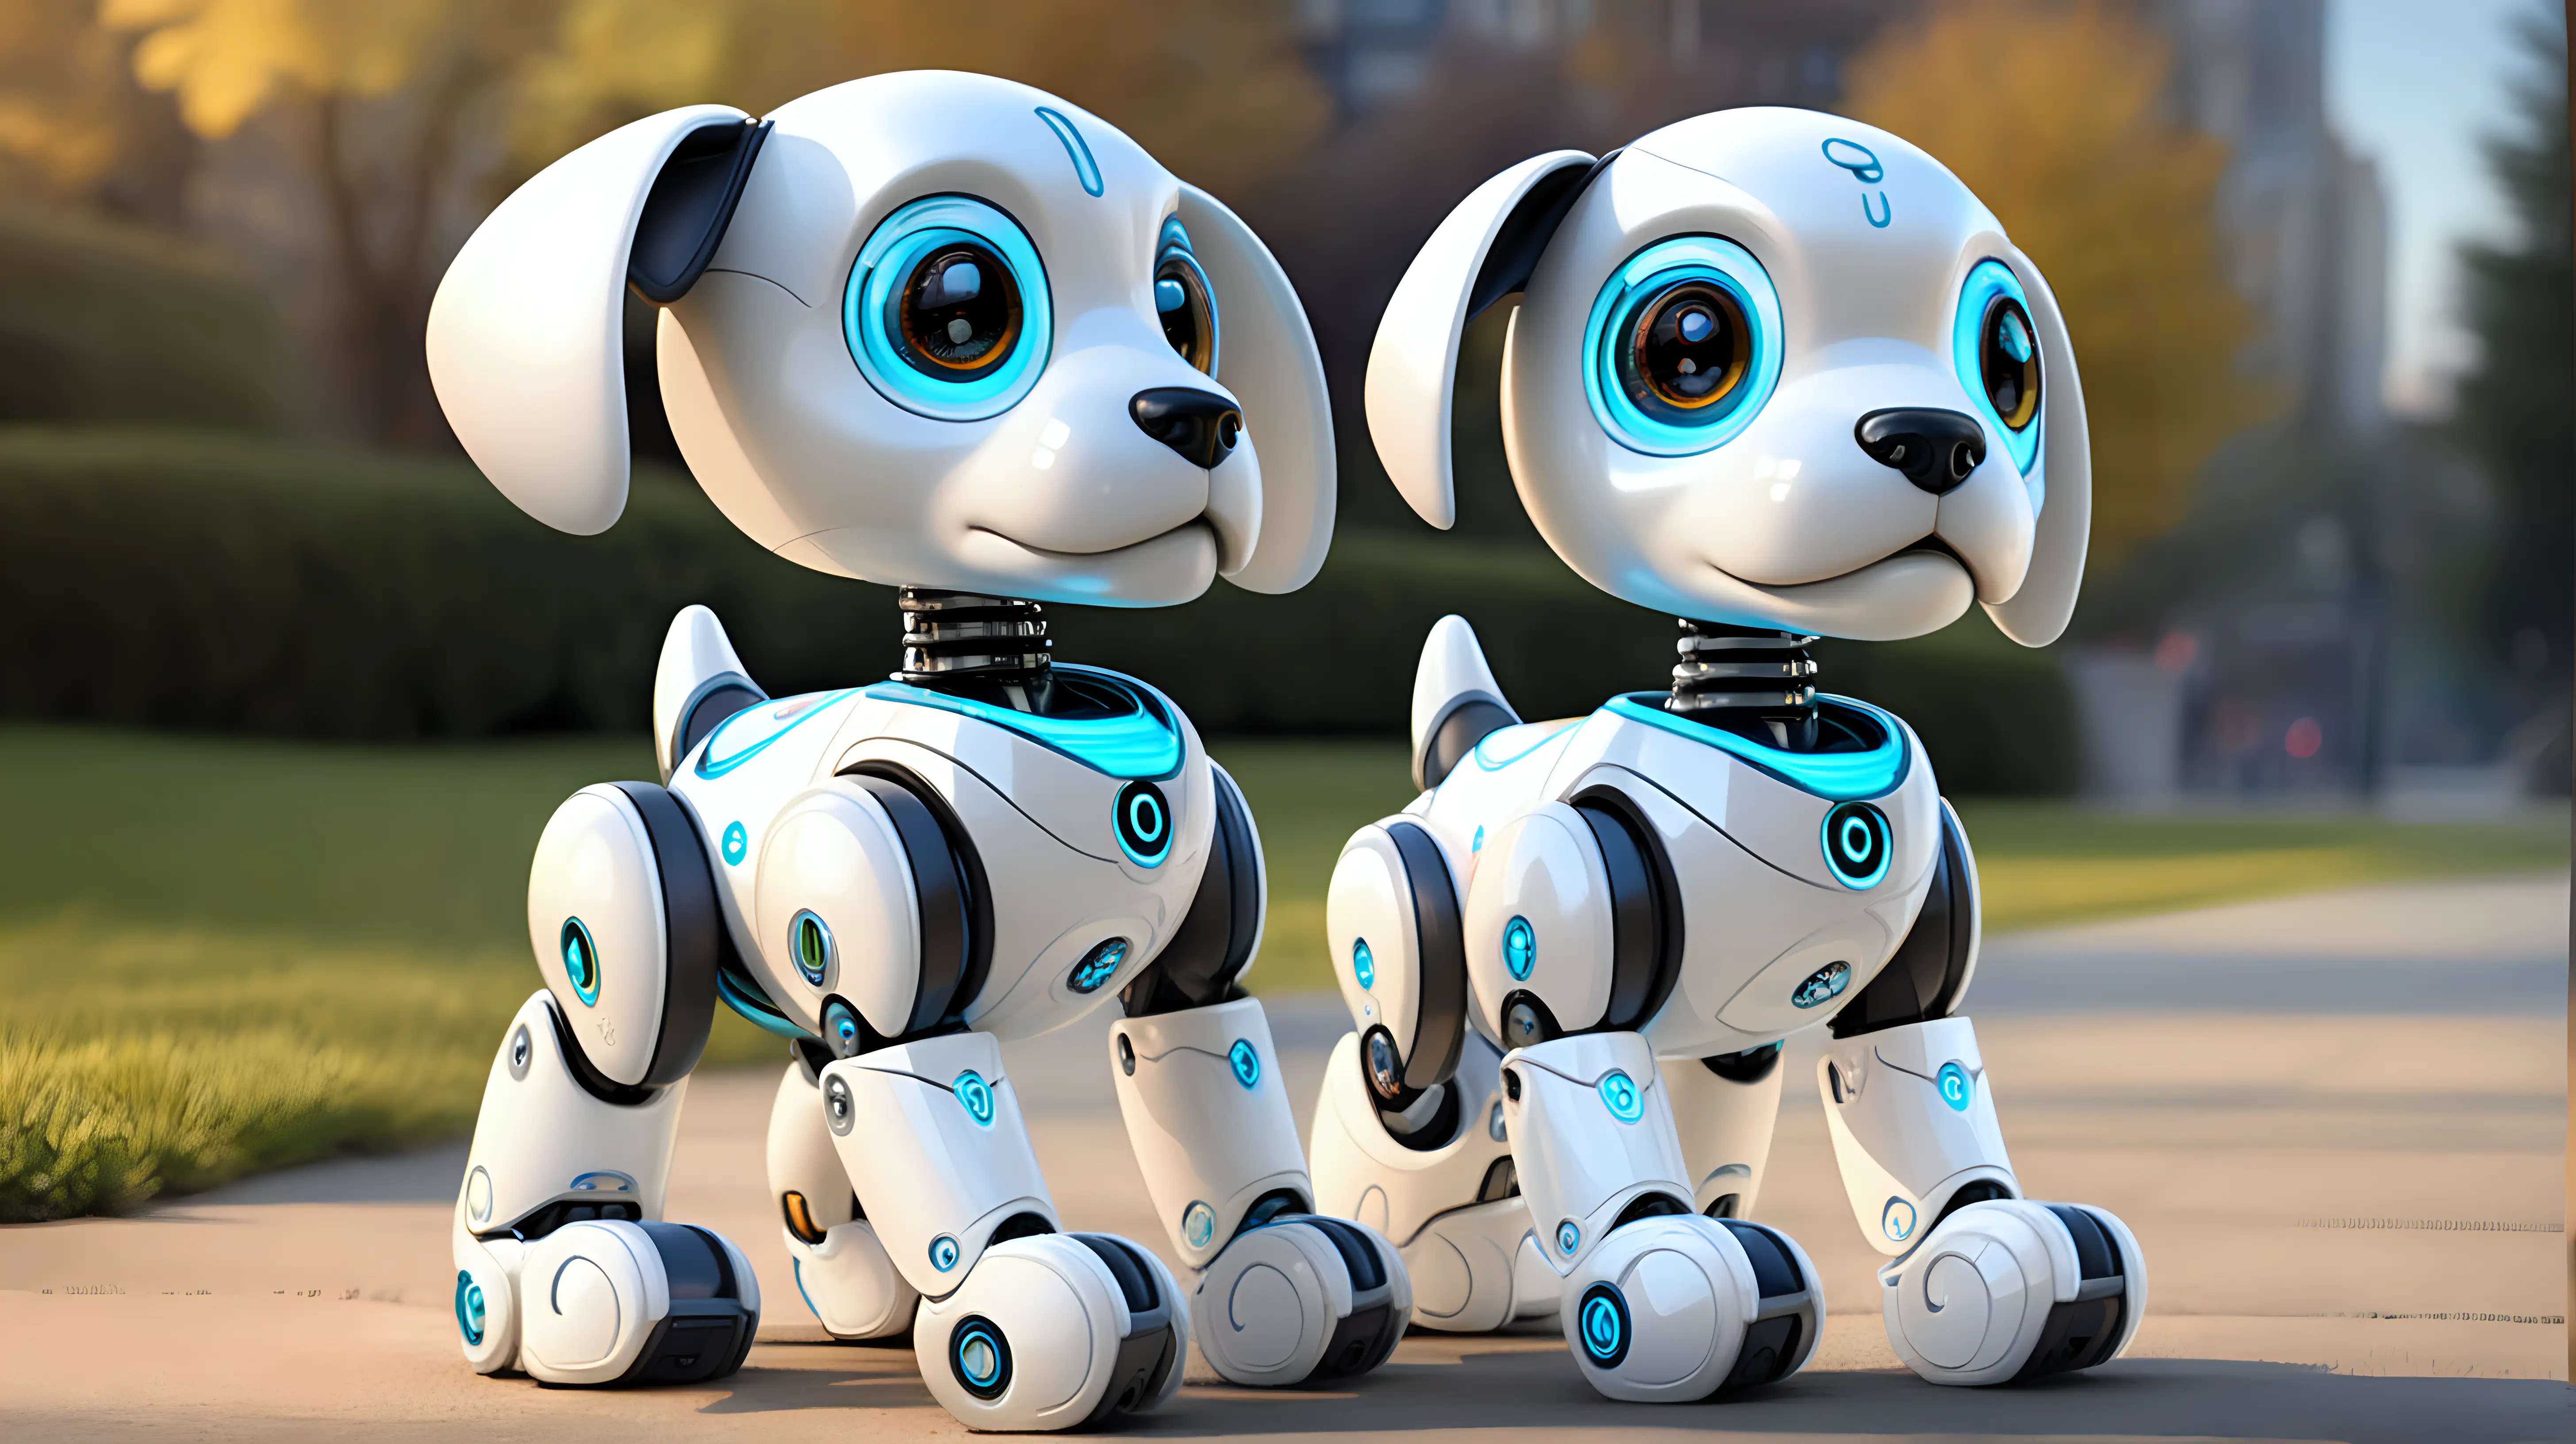 "Design a sweet and inquisitive cartoon robot puppy, programmed to understand and respond to human emotions, becoming a loyal companion to children and adults alike."